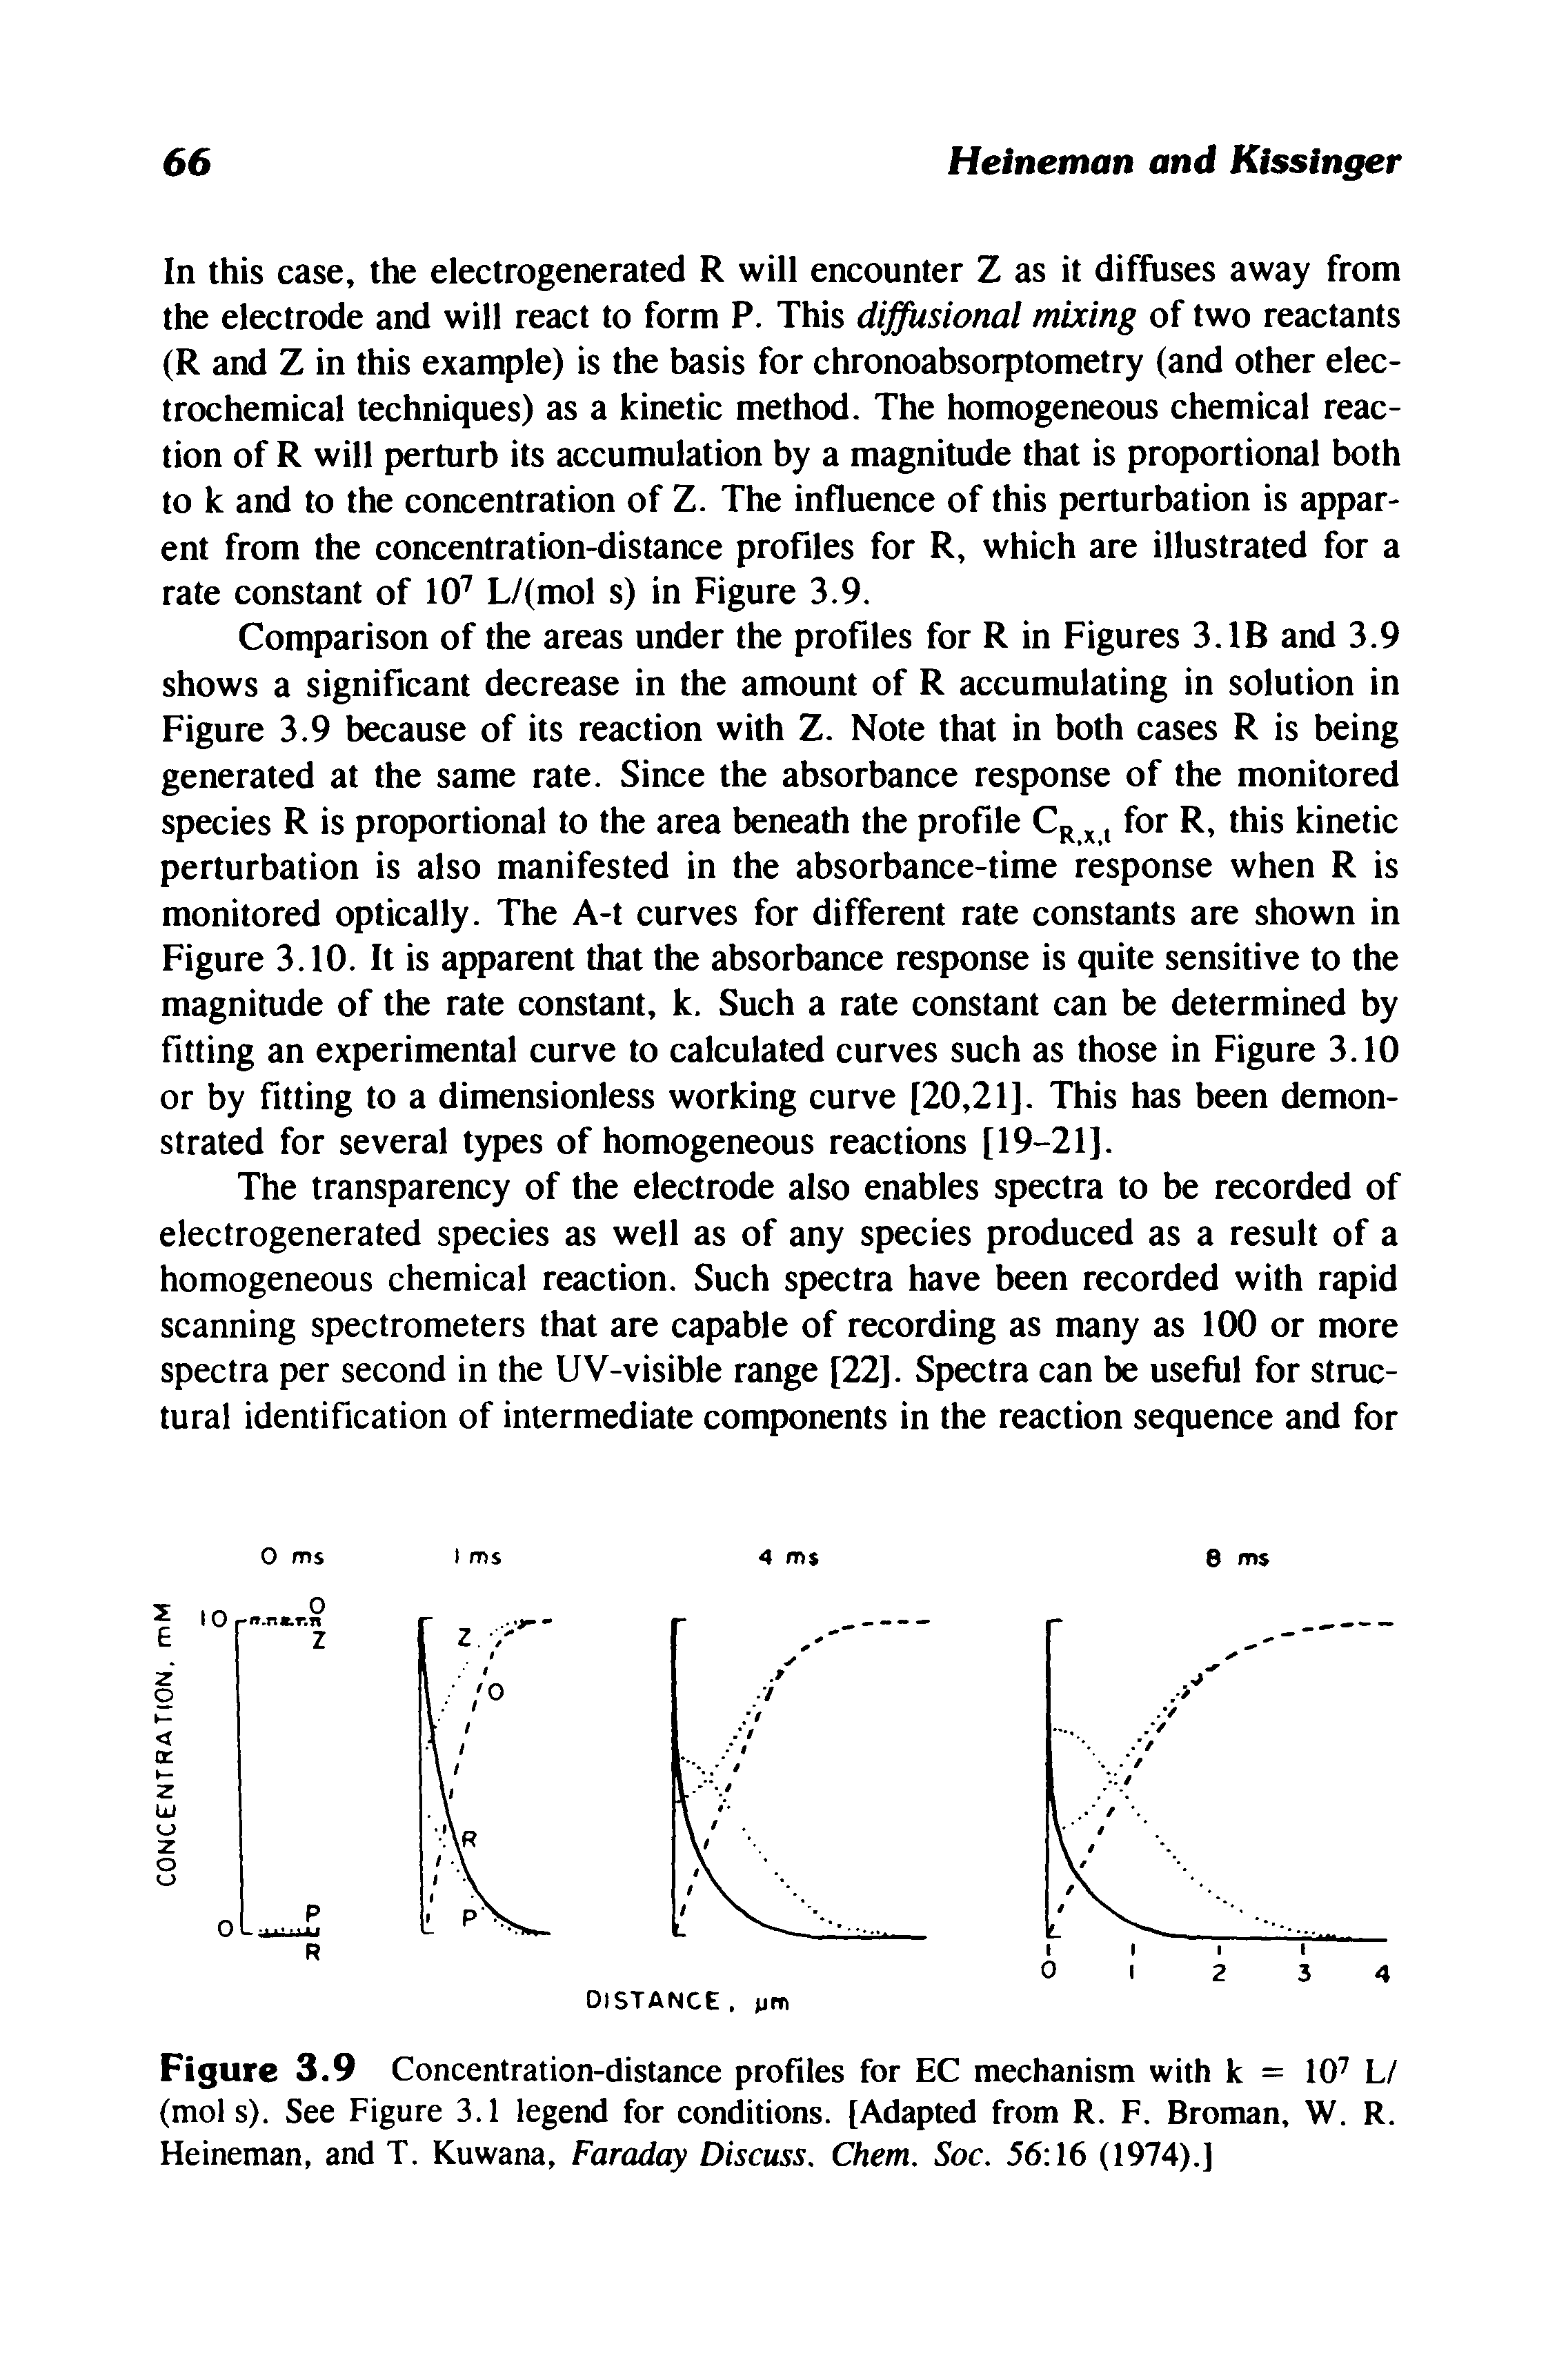 Figure 3.9 Concentration-distance profiles for EC mechanism with k = 107 L/ (mol s). See Figure 3.1 legend for conditions. [Adapted from R. F. Broman, W. R. Heineman, and T. Kuwana, Faraday Discuss. Chem. Soc. 56 16 (1974).]...